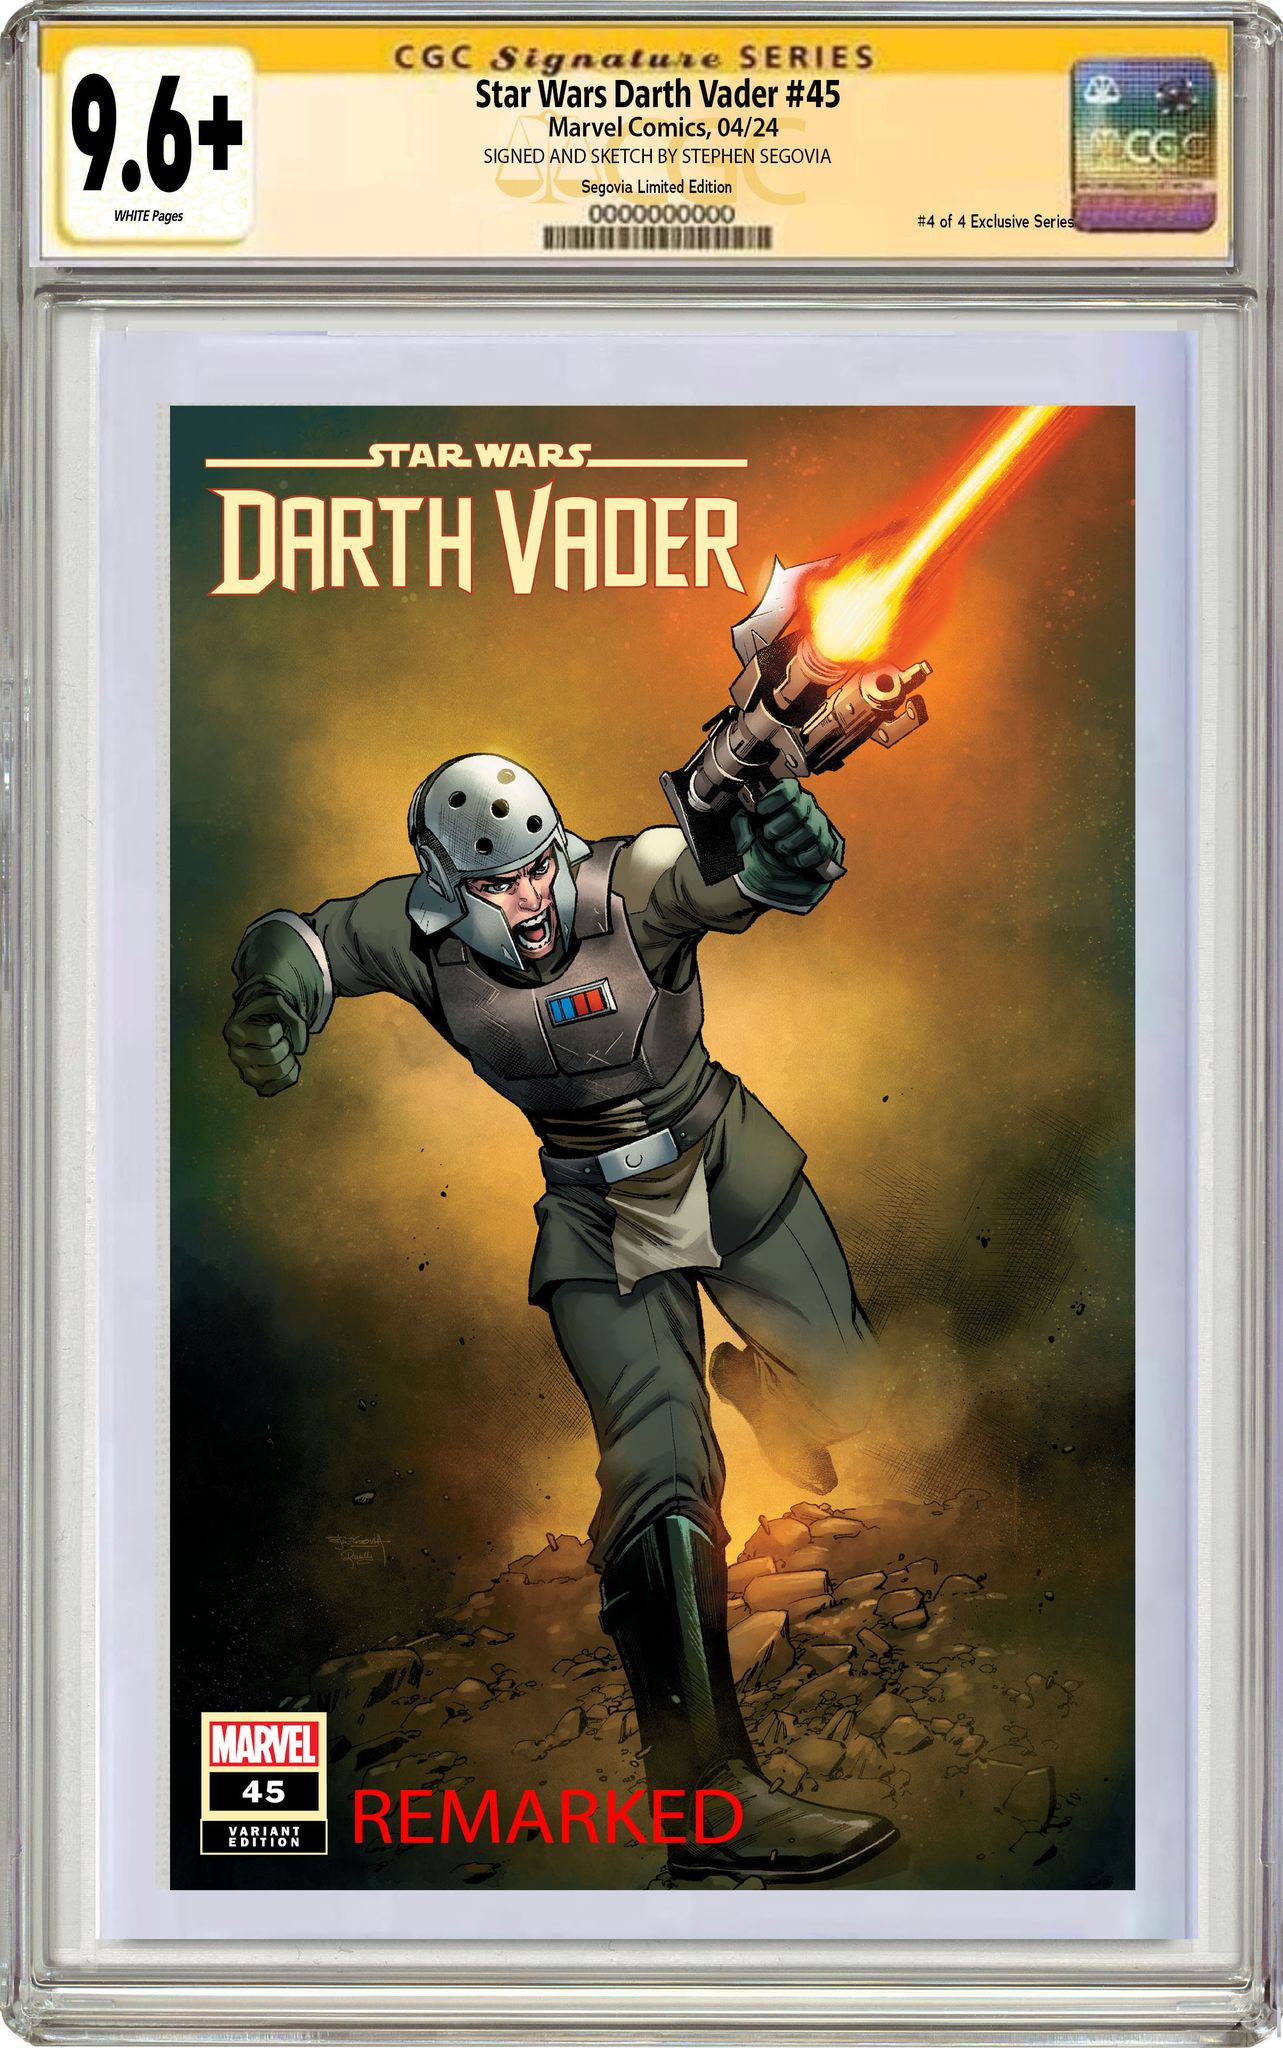 STAR WARS: DARTH VADER 45 STEPHEN SEGOVIA REBELS 10TH ANNIVERSARY LIMITED EDITION #4 OF 4 EXCLUSIVE SERIES OPTIONS - 04/10/2024